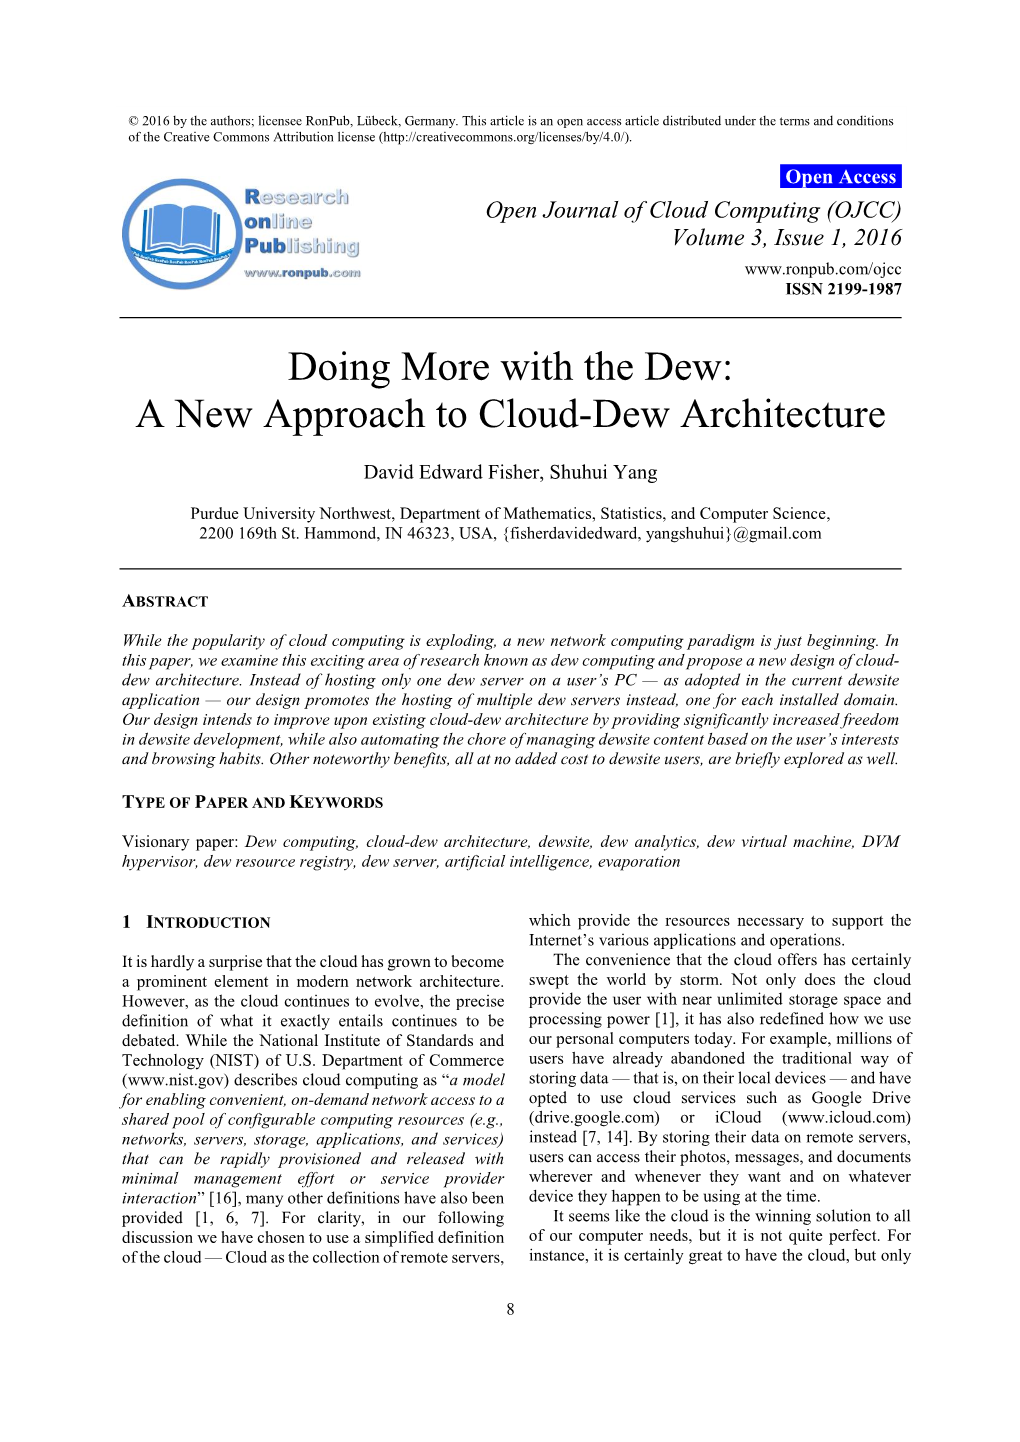 A New Approach to Cloud-Dew Architecture